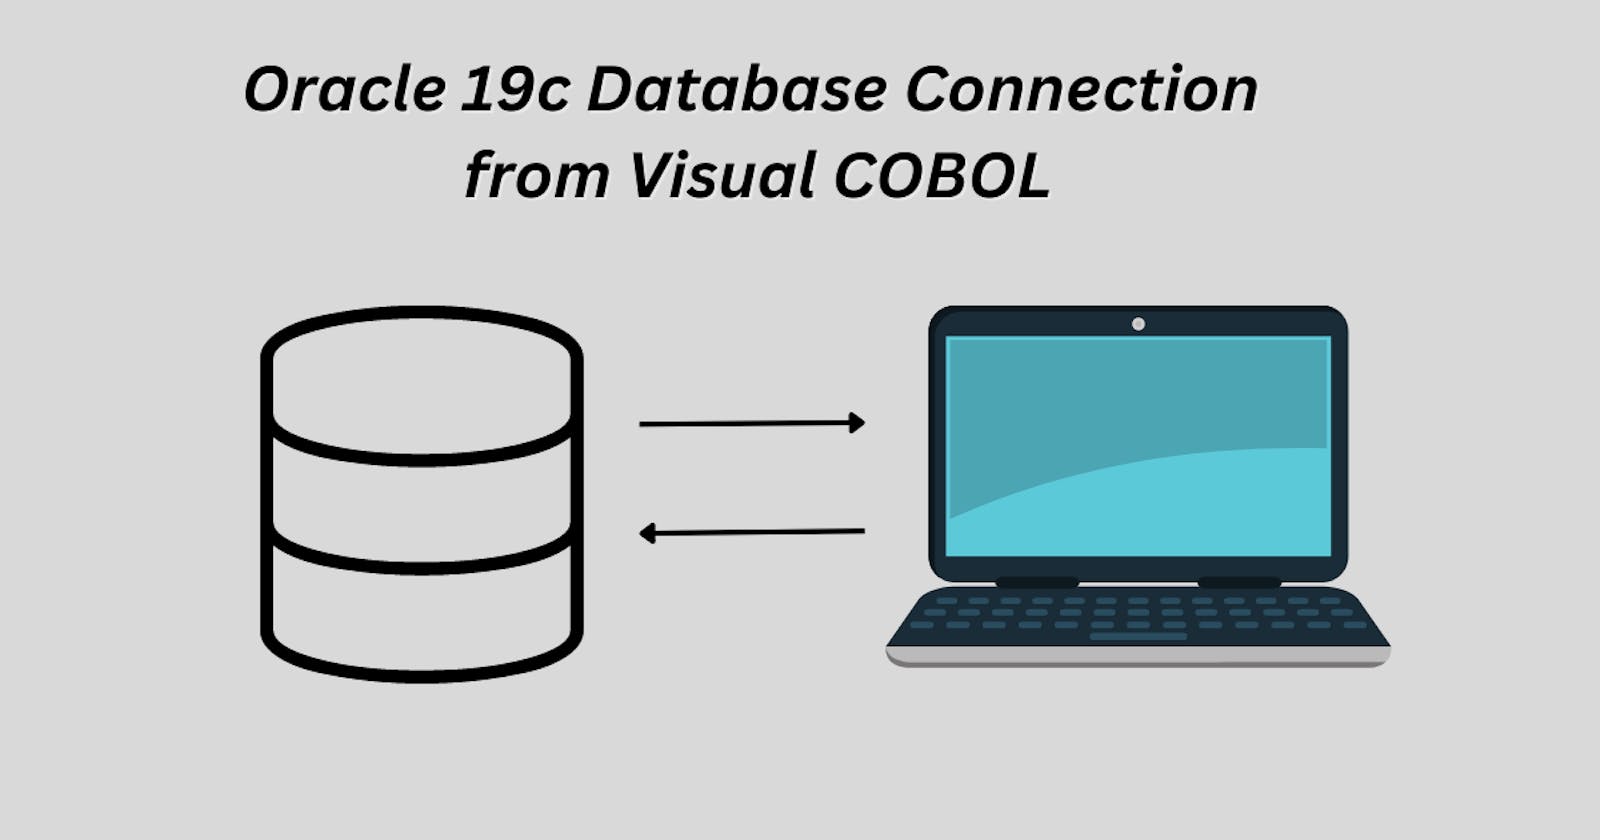 How to Connect Oracle 19c from Micro Focus Visual COBOL 8?